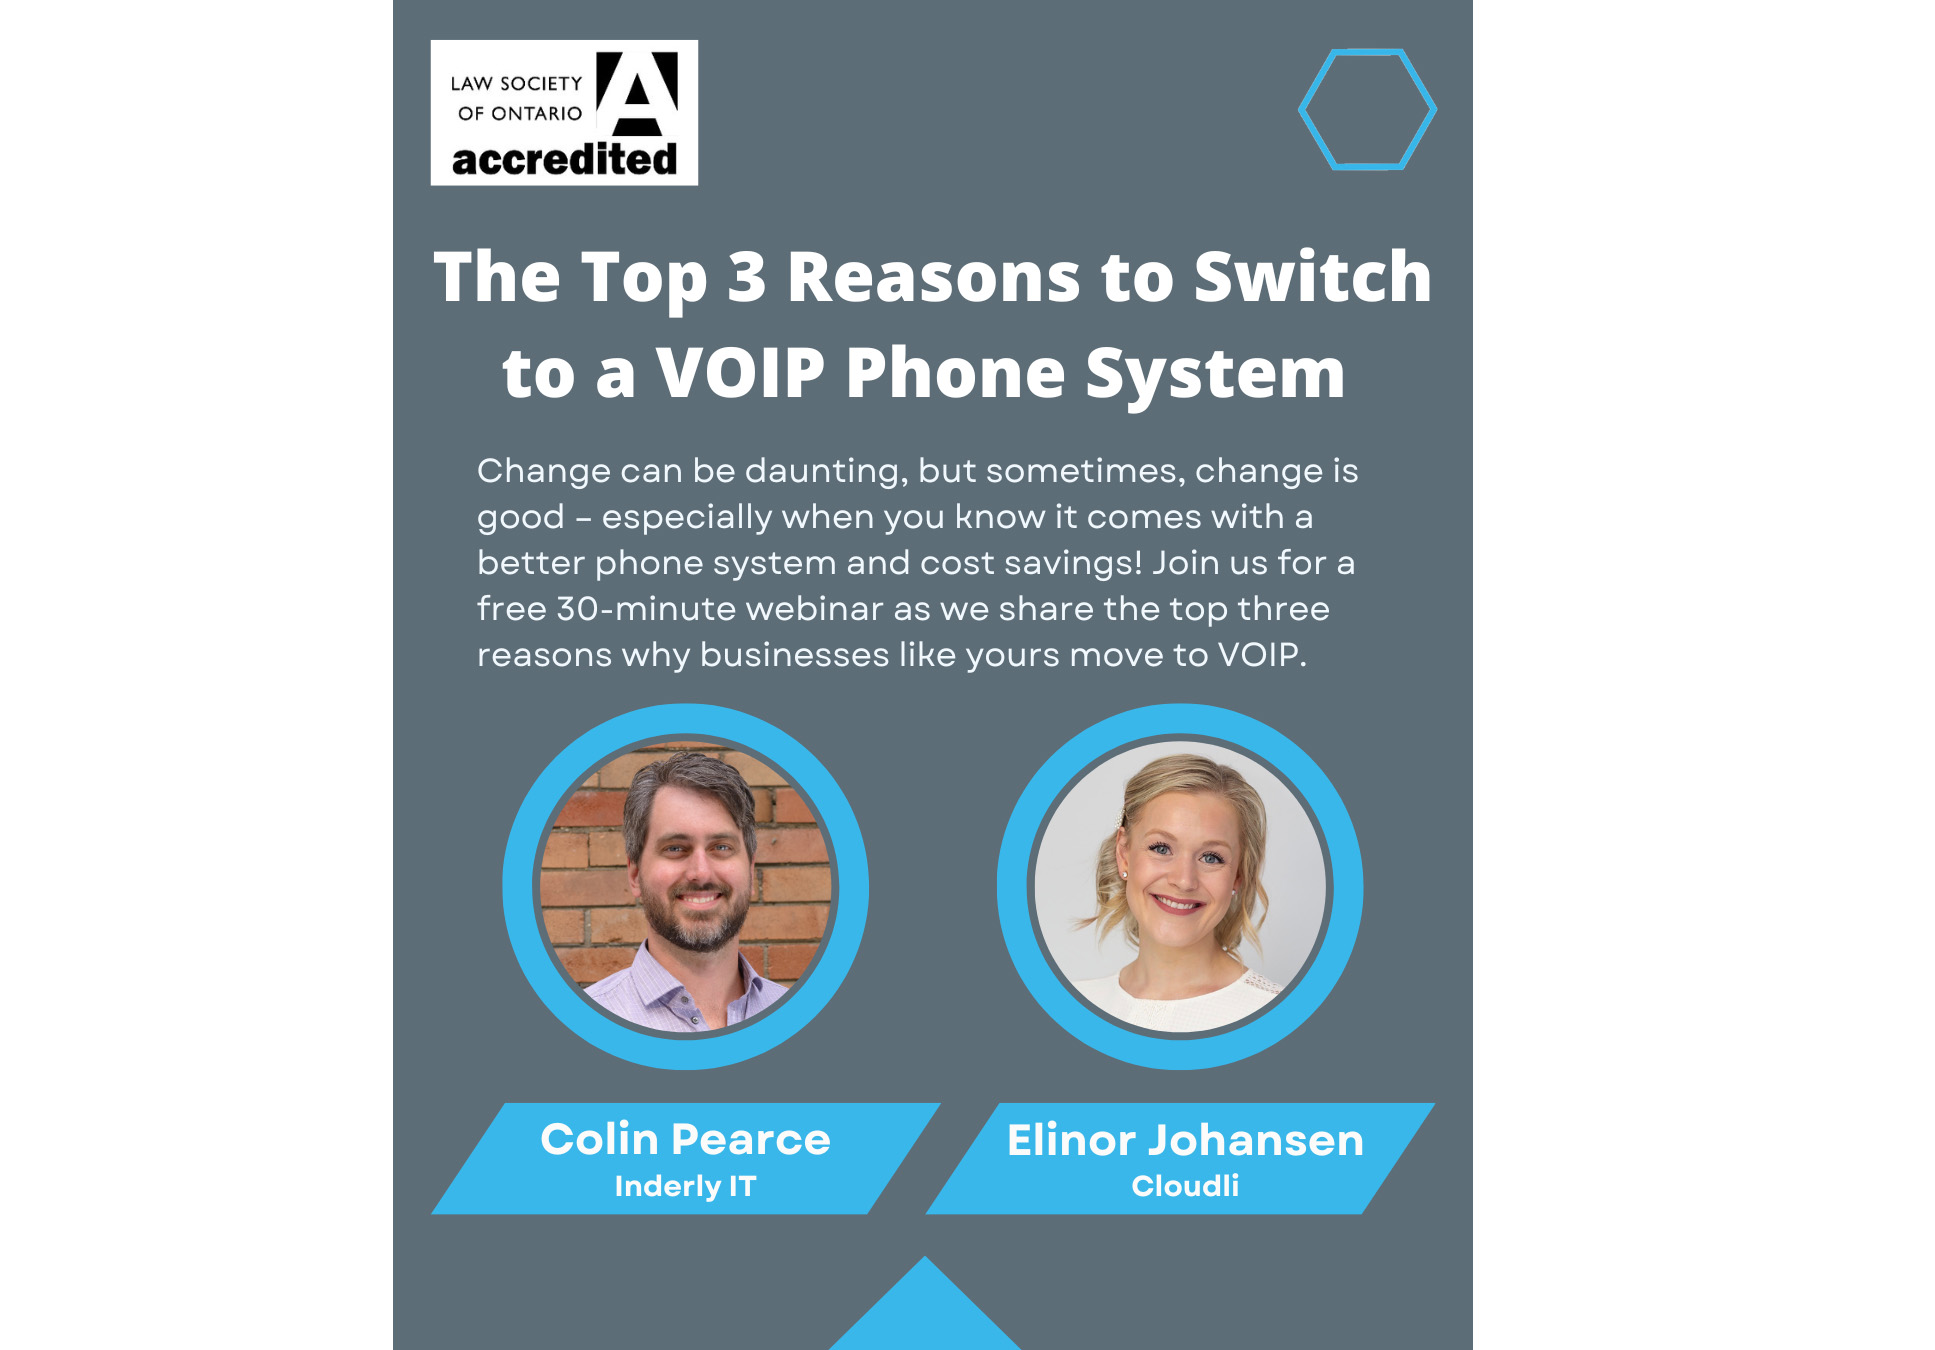 Top 3 Reasons to Switch to VOIP (w border)